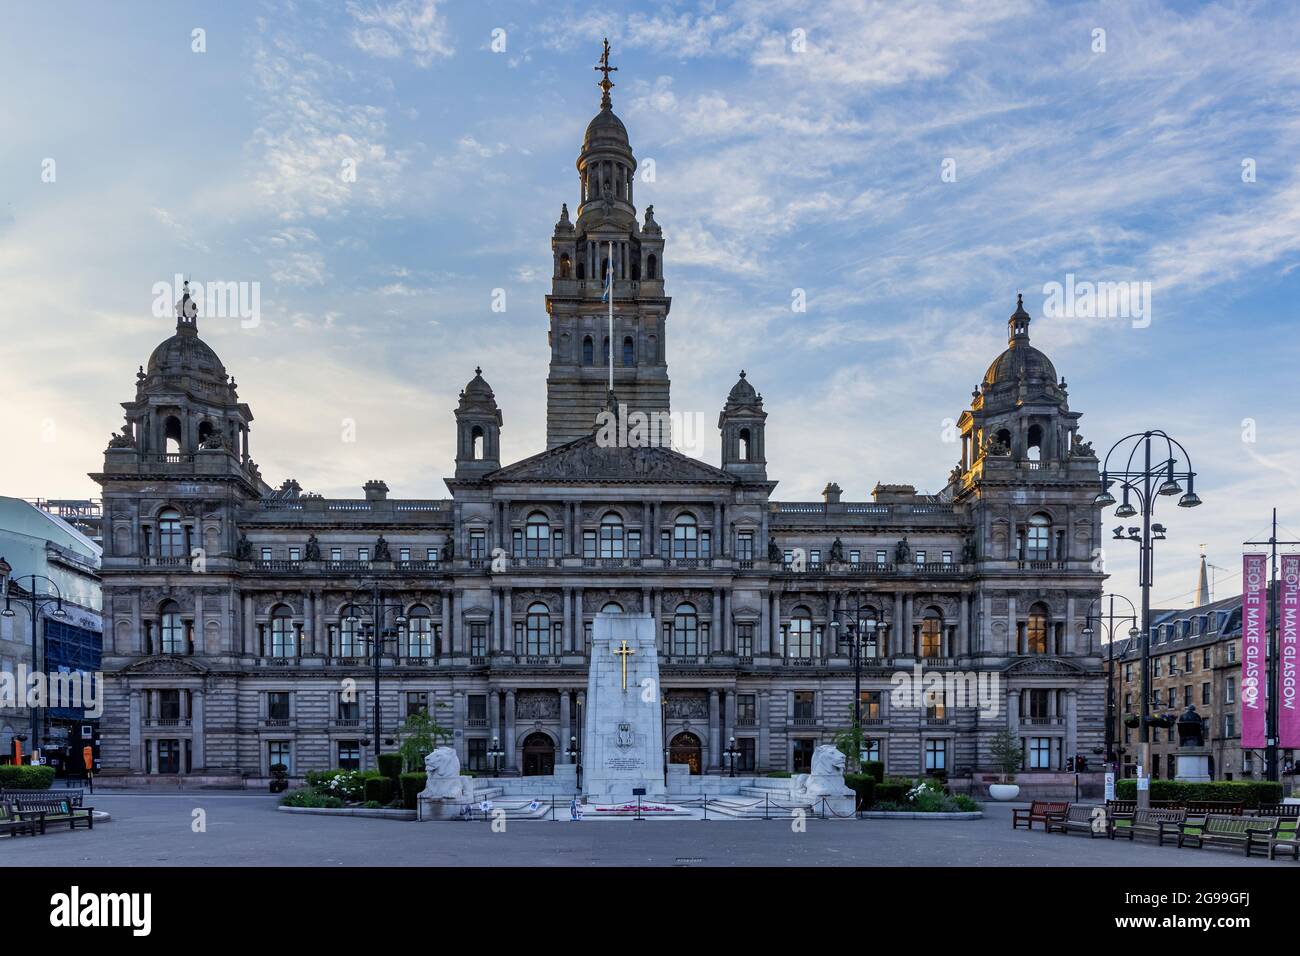 The Cenotaph war memorial and Glasgow City Chambers building at George Square in Glasgow city centre, Scotland, UK Stock Photo